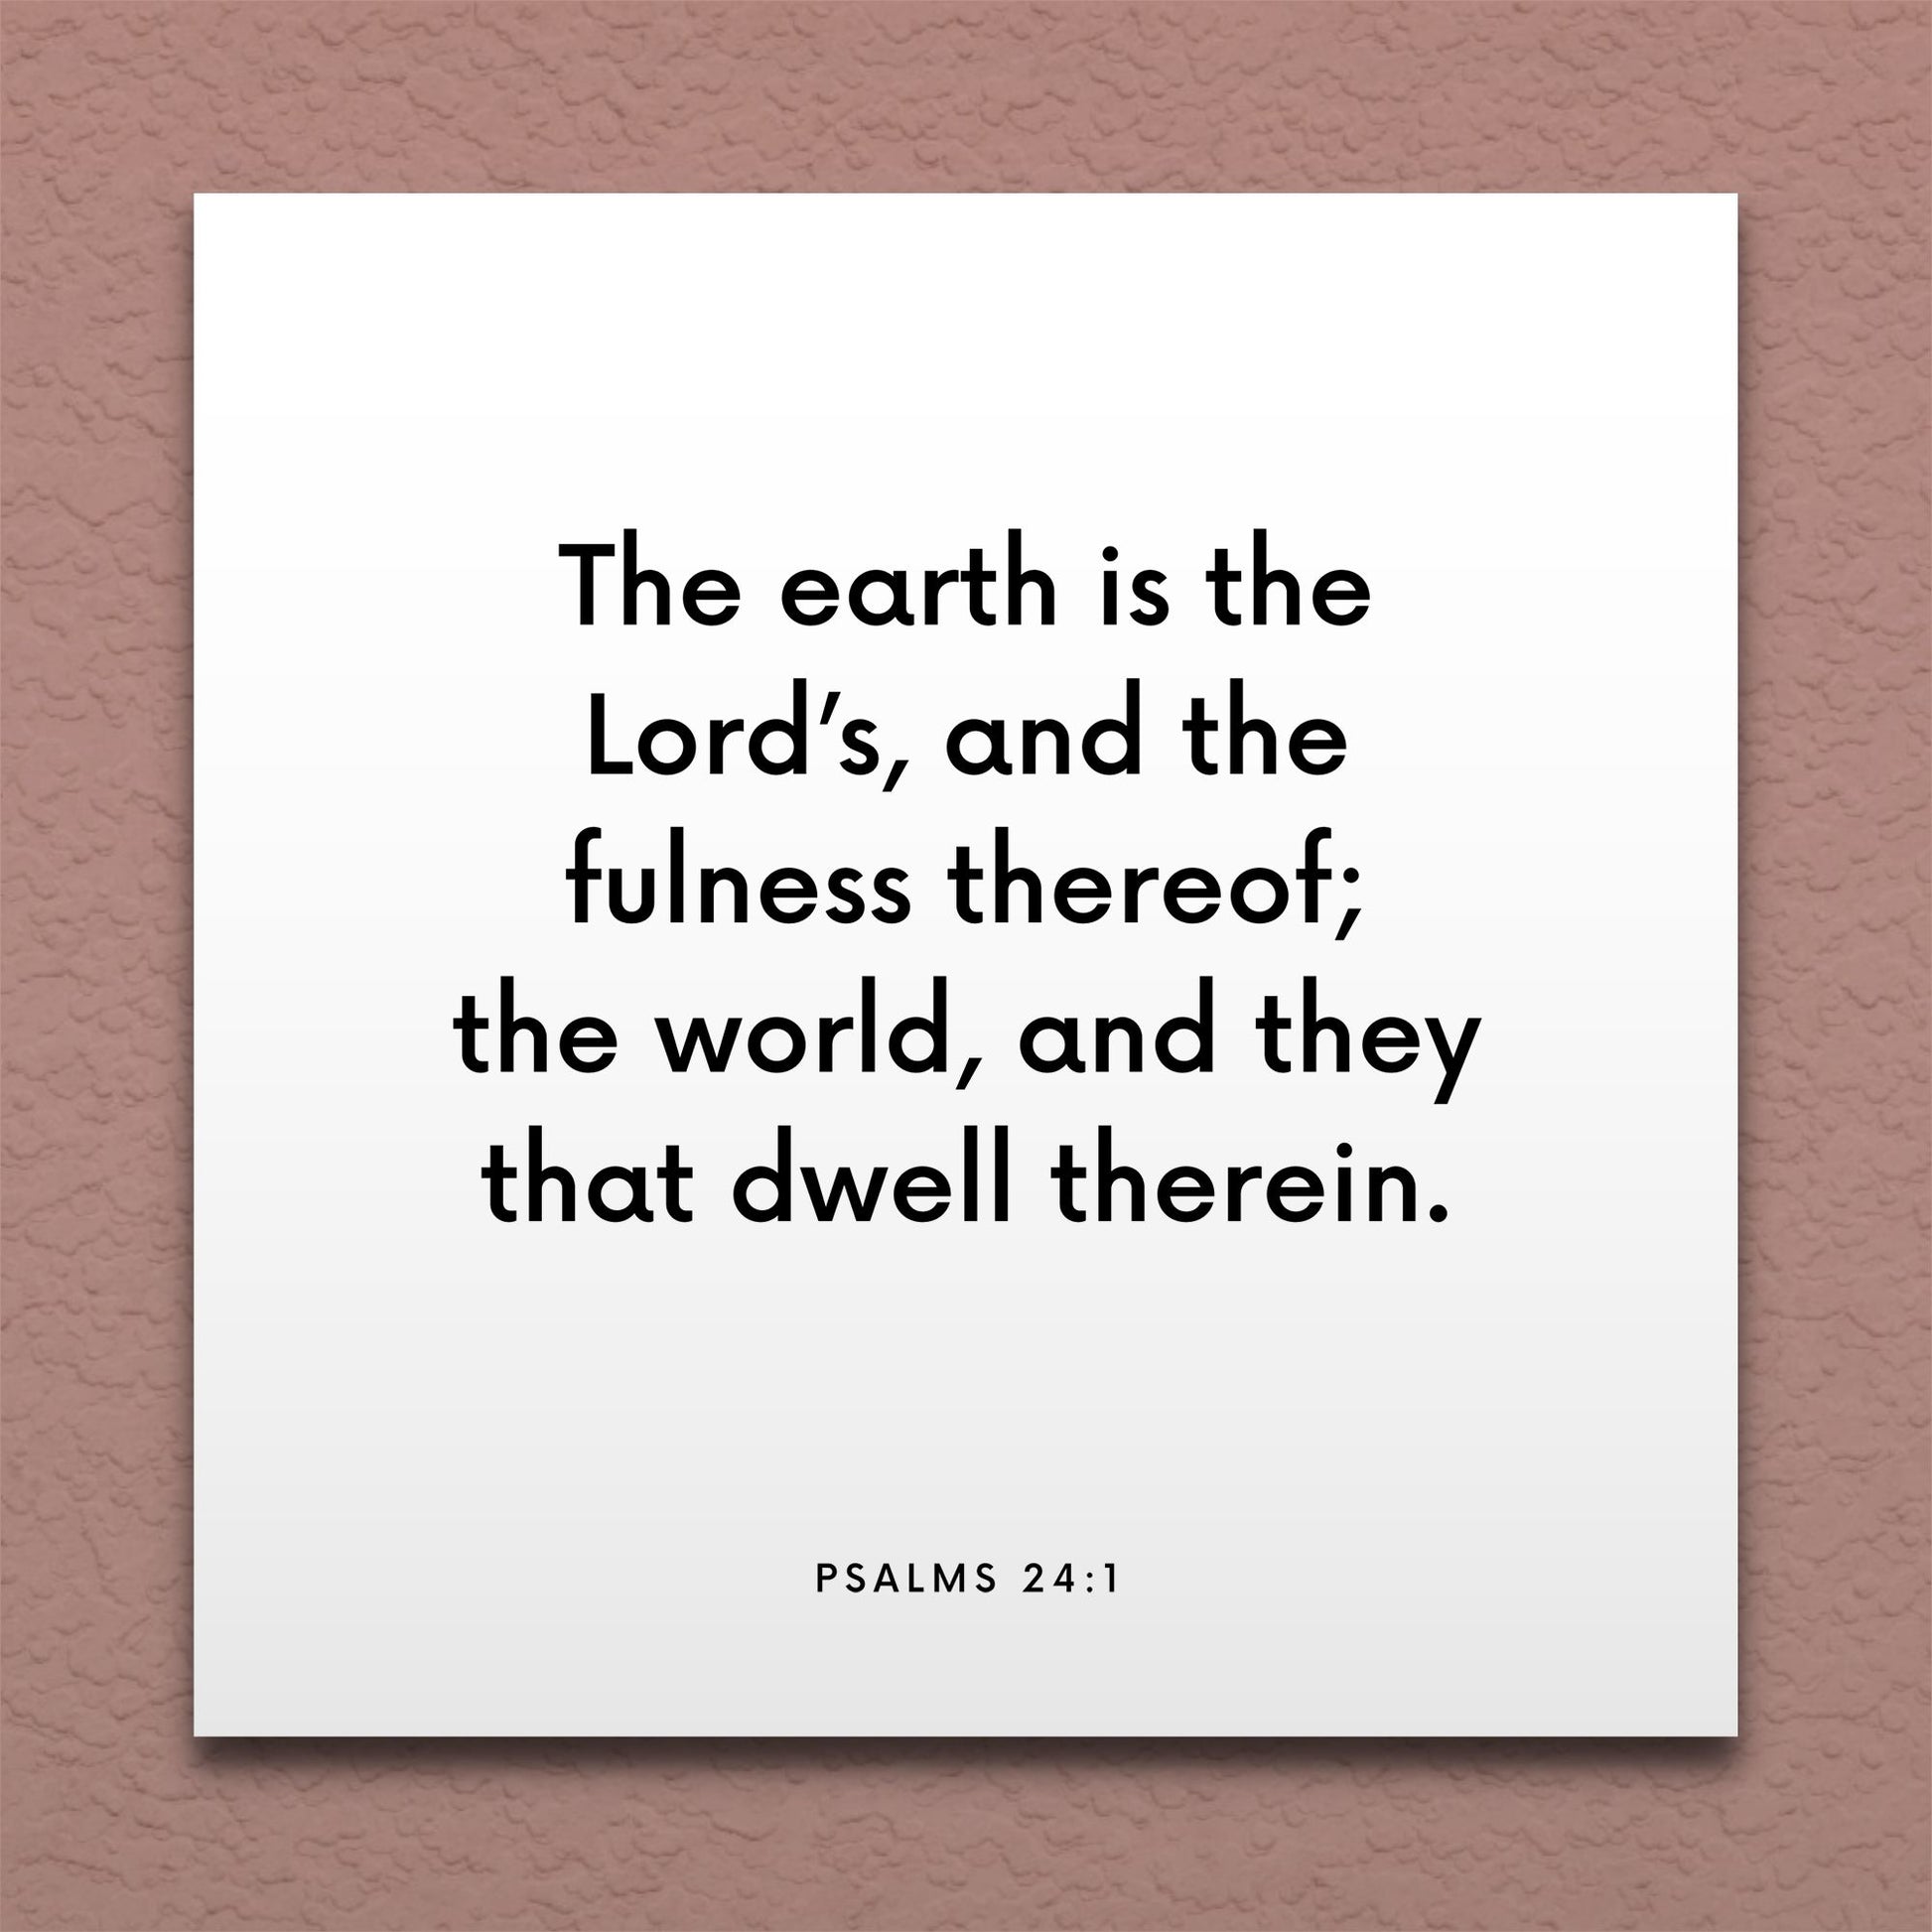 Wall-mounted scripture tile for Psalms 24:1 - "The earth is the Lord’s, and the fulness thereof"